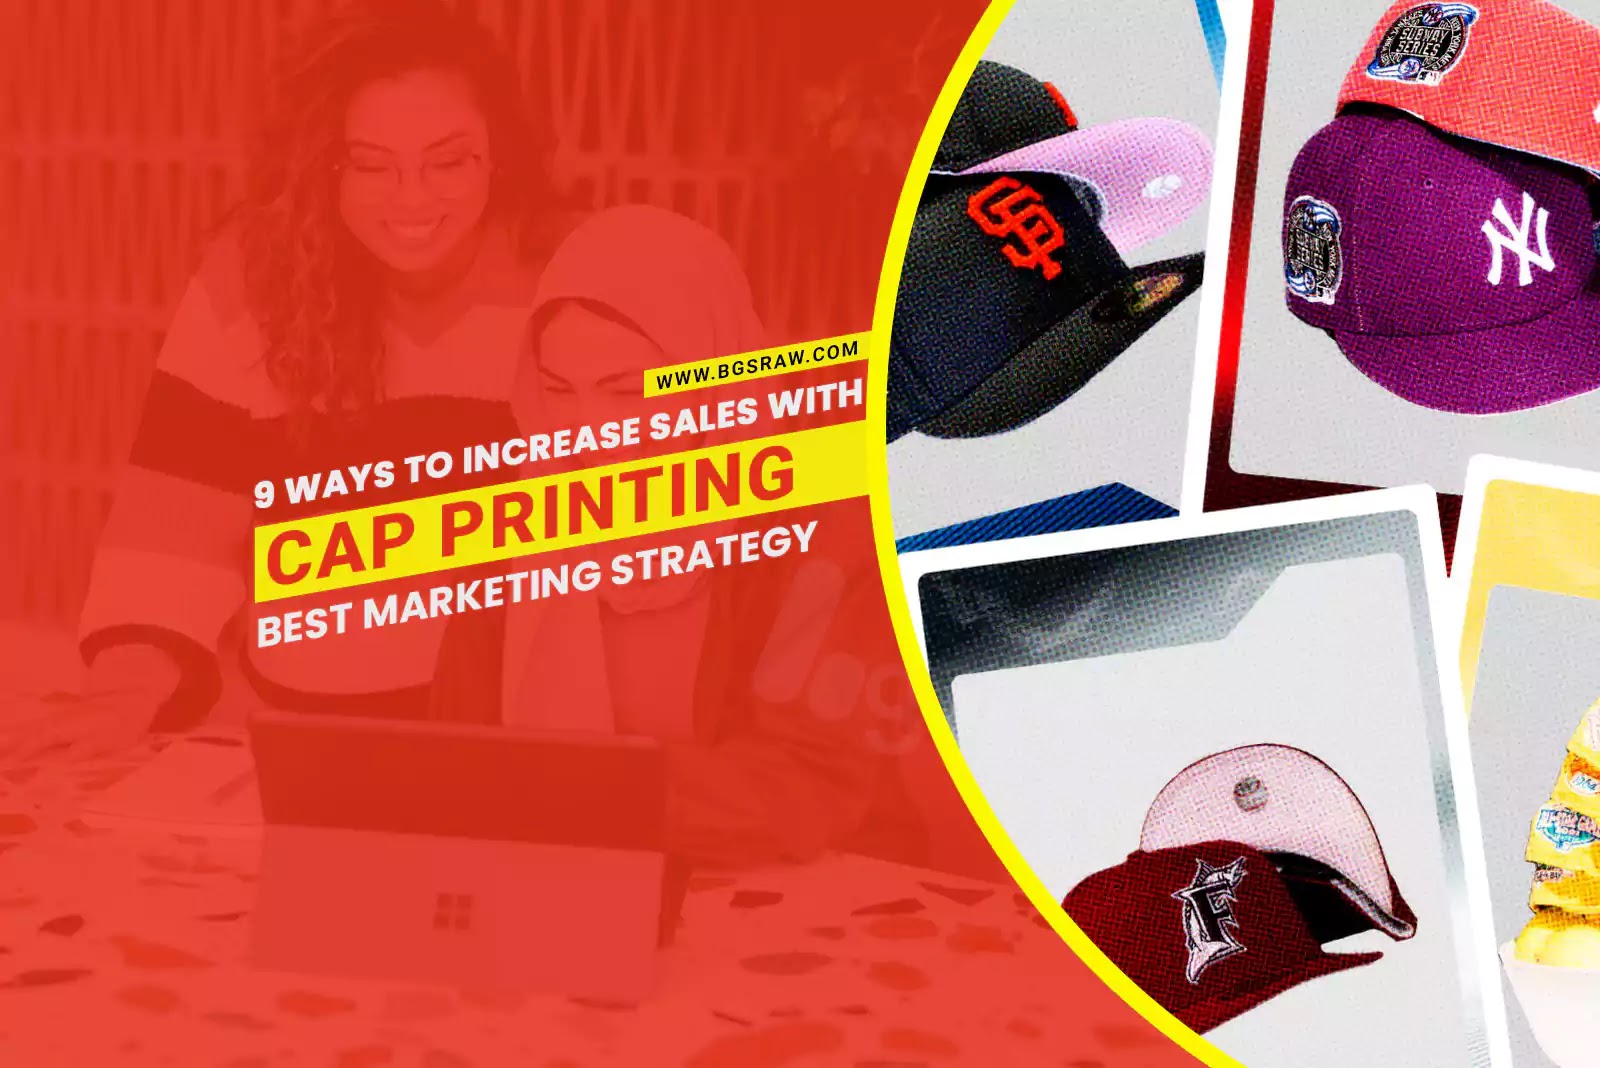 Best Marketing Strategy, 9 Ways to Increase Sales with Cap Printing in 2023